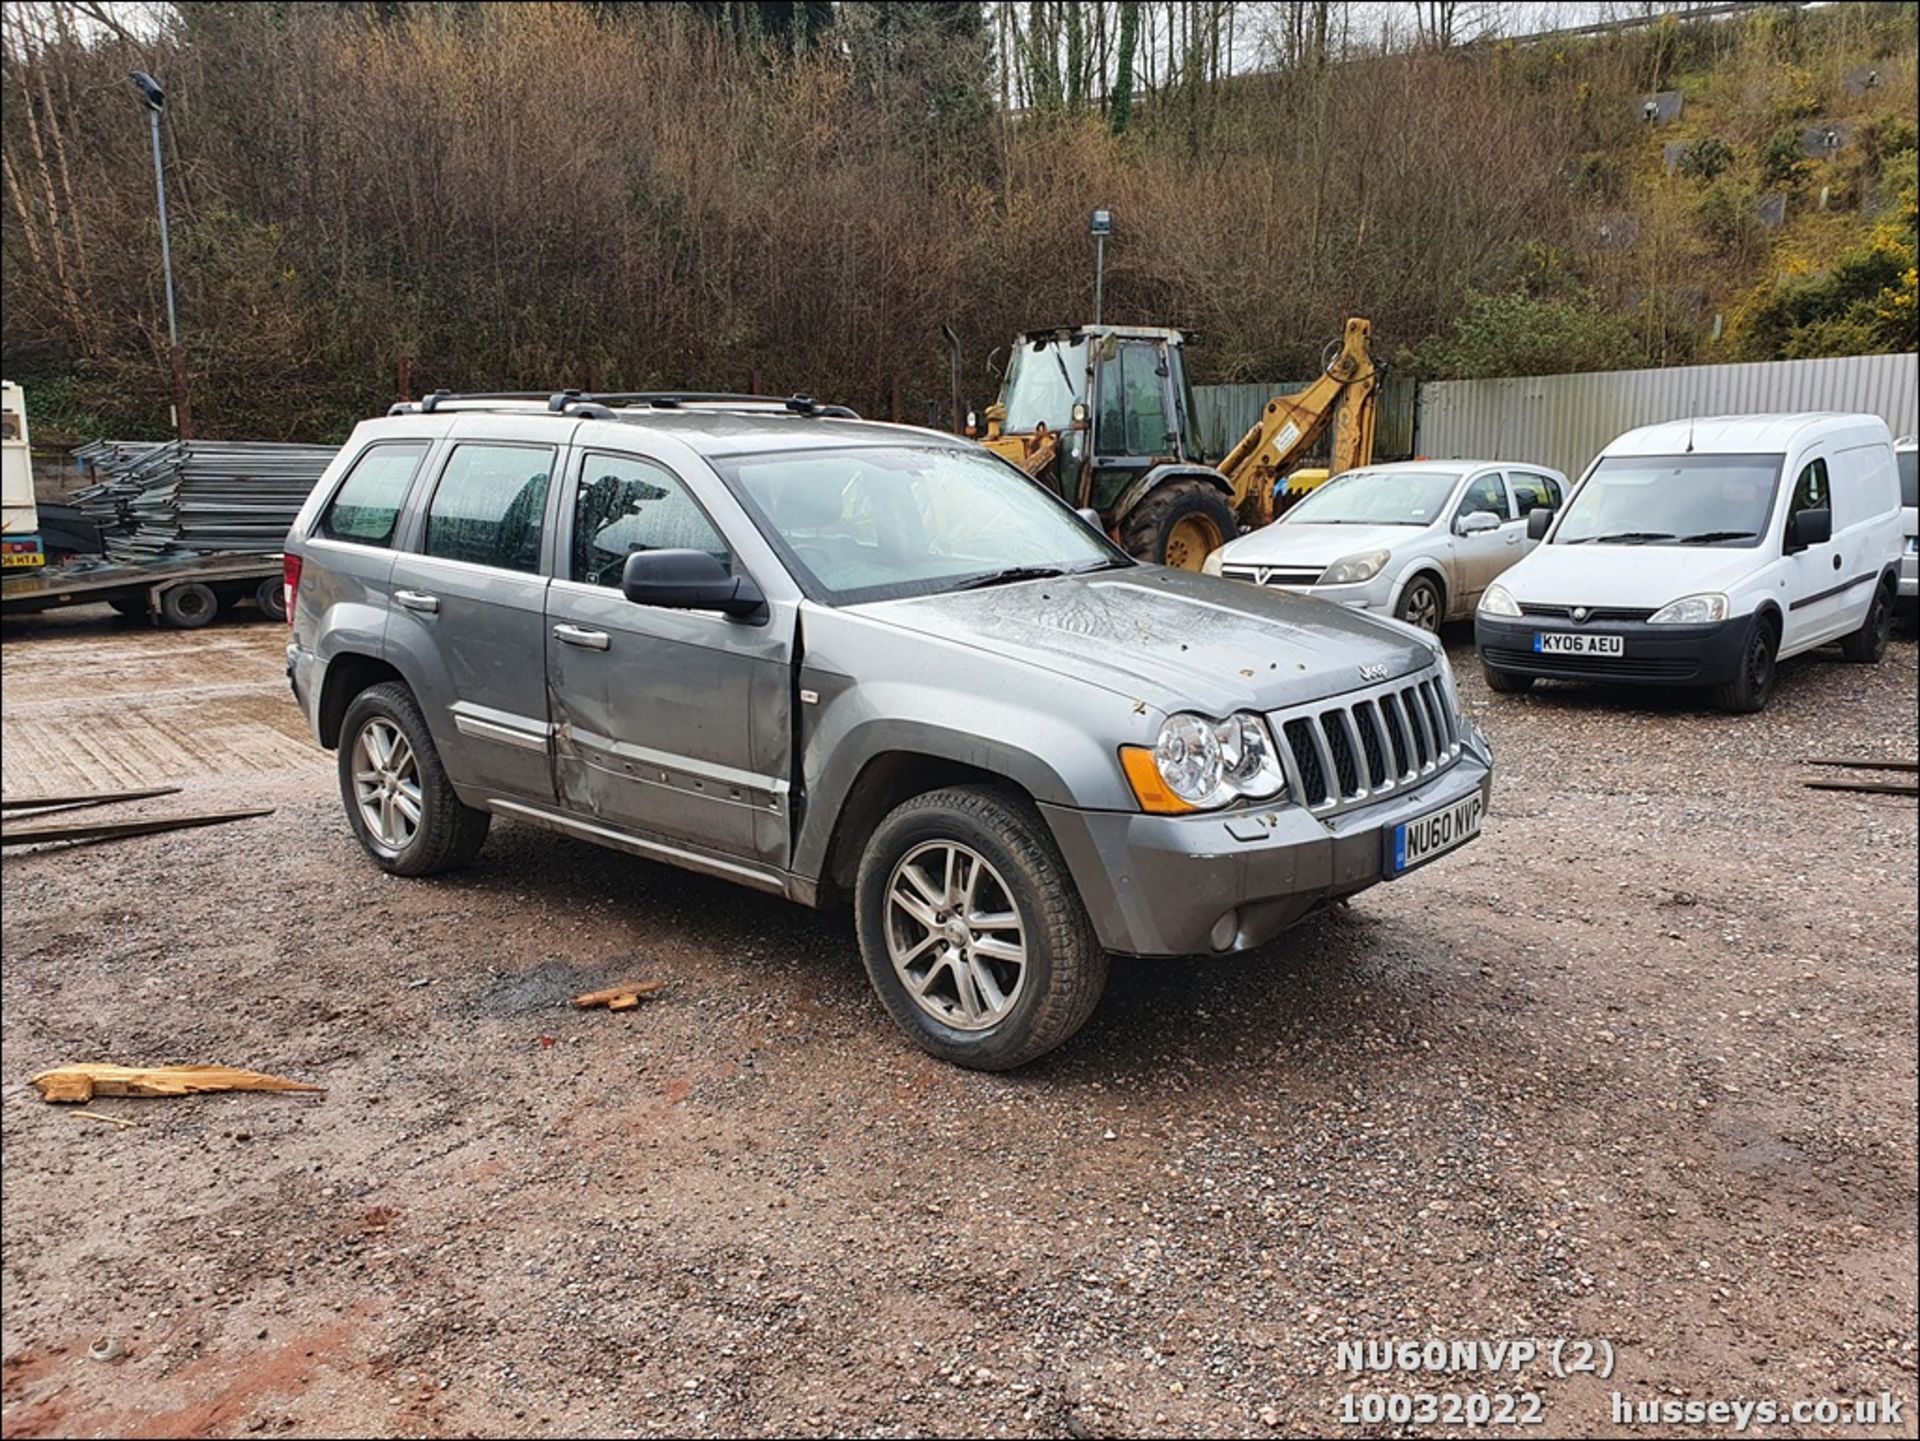 10/60 JEEP G-CHEROKEE OVERLAND CRD A - 2987cc 5dr Estate (Grey, 154k) - Image 3 of 47